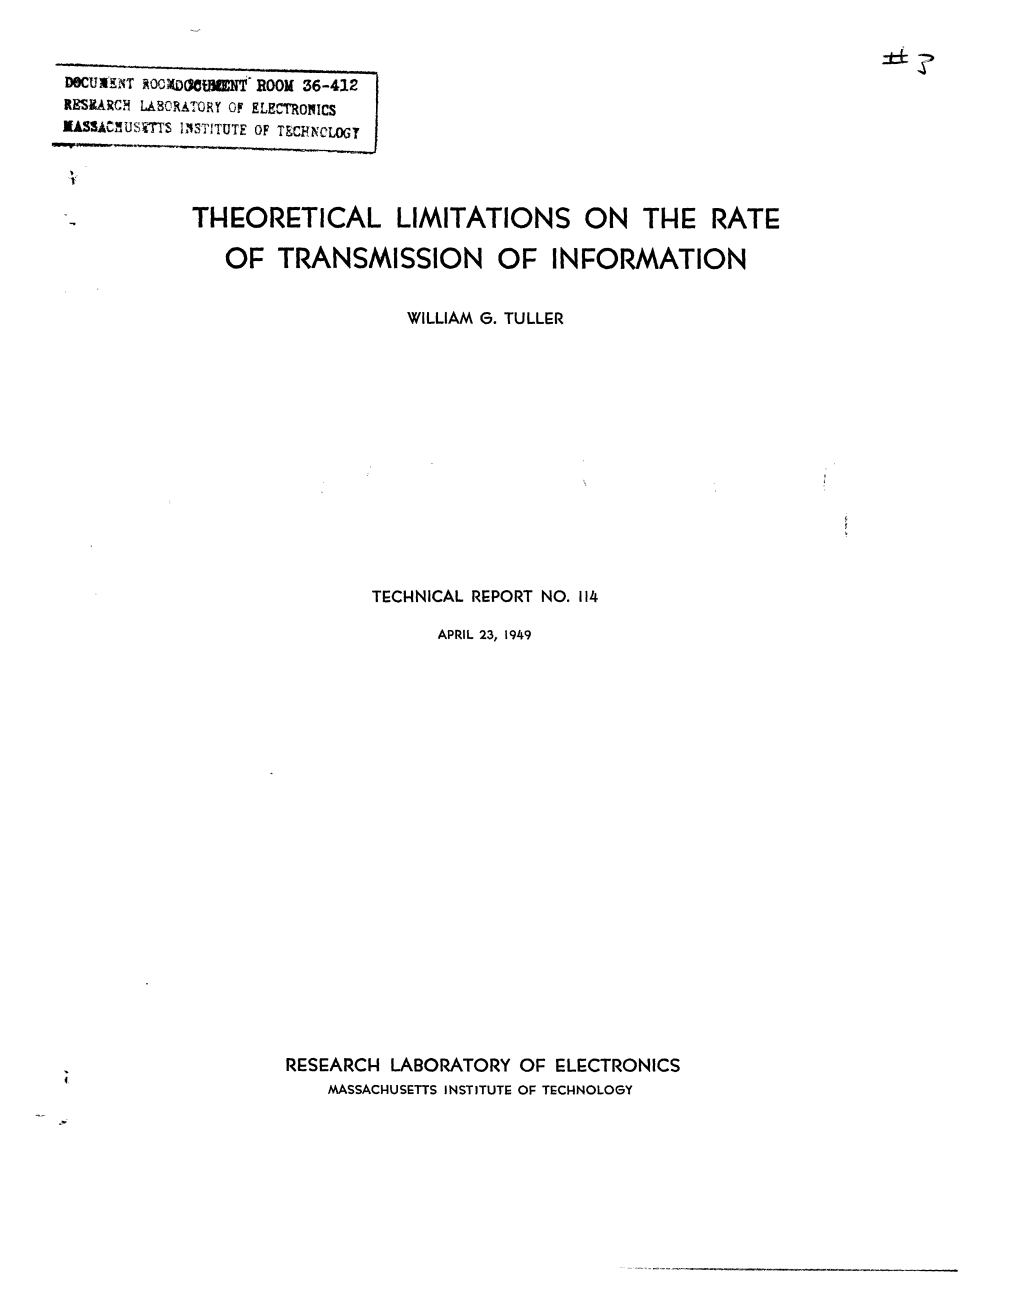 Theoretical Limitations on the Rate of Transmission of Information